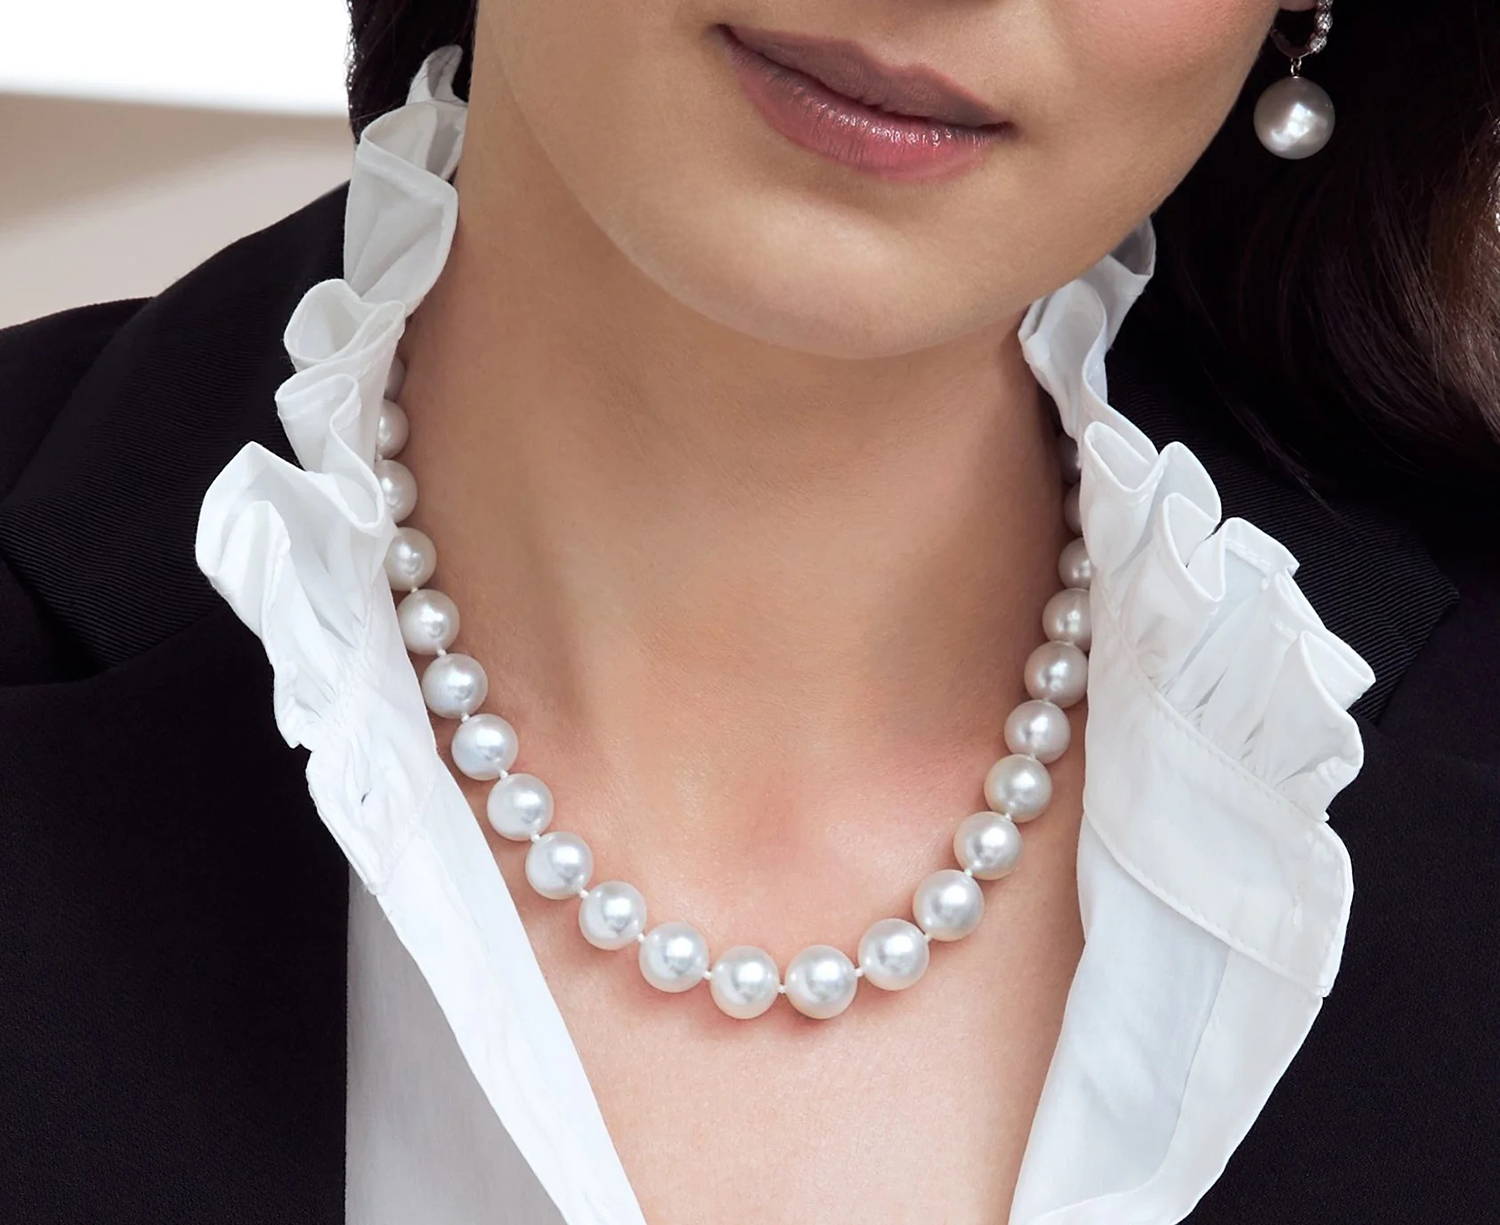 Model with dark hair wearing a South Sea pearl necklace